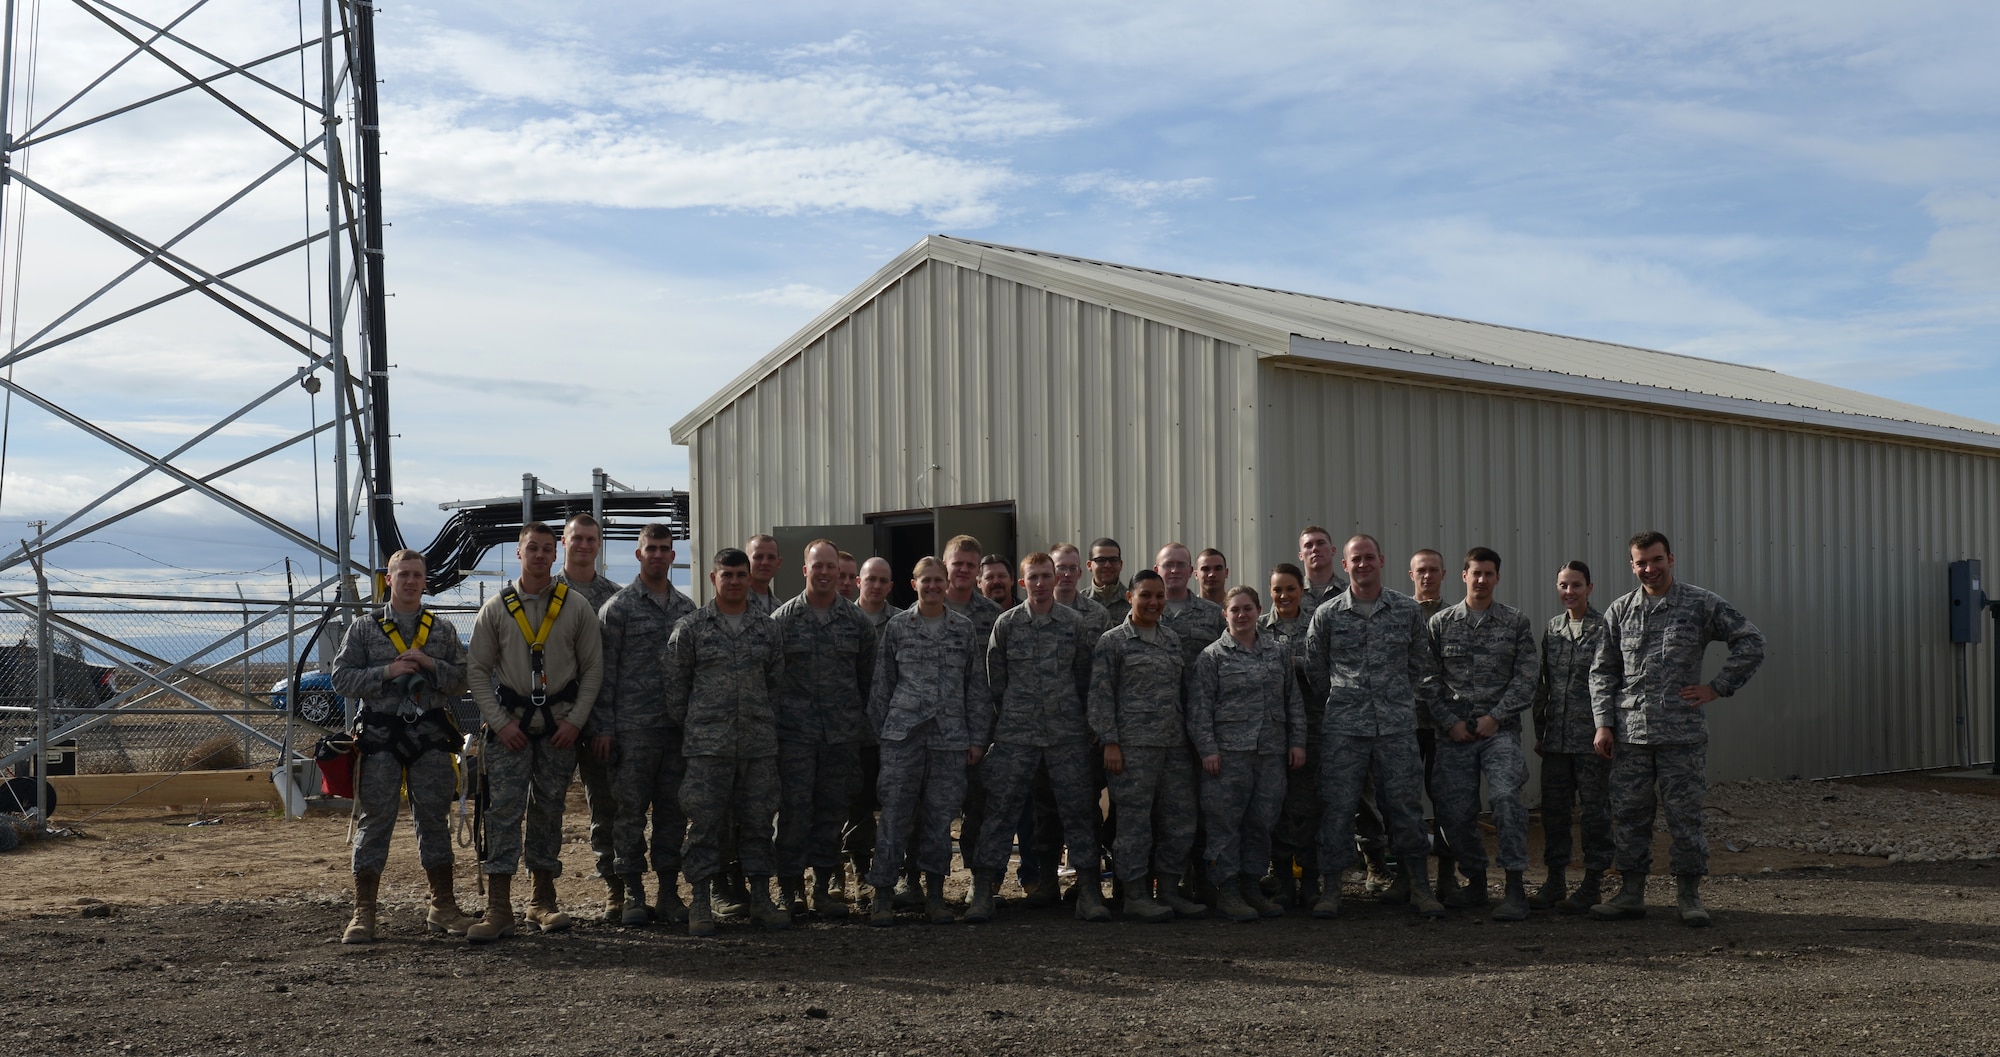 U.S. Air Force Airmen pose for a photo Nov. 09, 2013, at Mountain Home Air Force Base, Idaho. Airmen from multiple squadrons collaborated in order to build a new Ground-to-air Transmissions and Receive antenna to enable mission success. (U.S. Air Force photo by Airman 1st Class Brittany A. Chase/RELEASED)